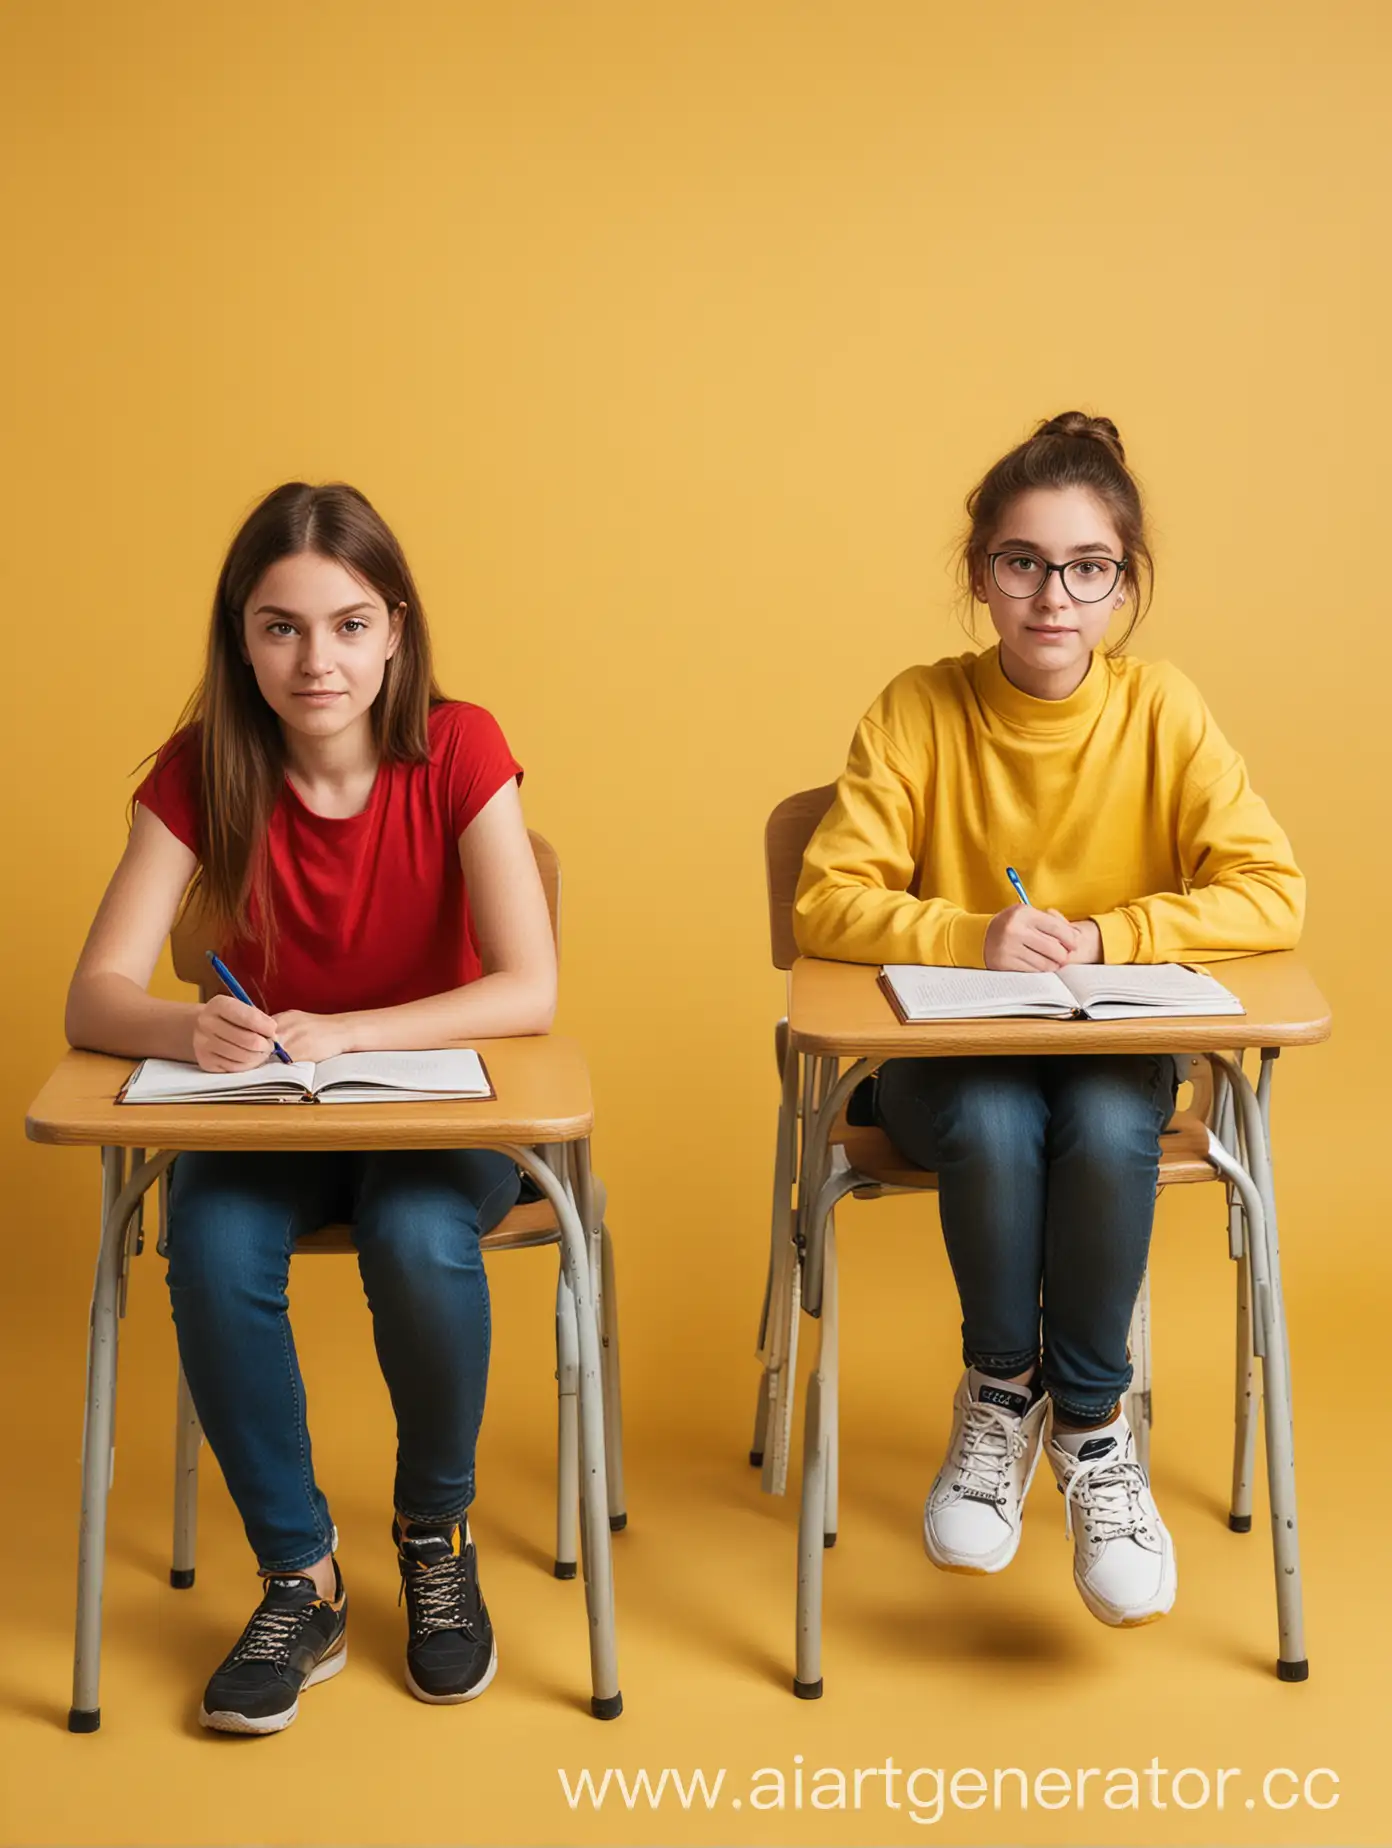  two students sitting at their desks on a yellow background